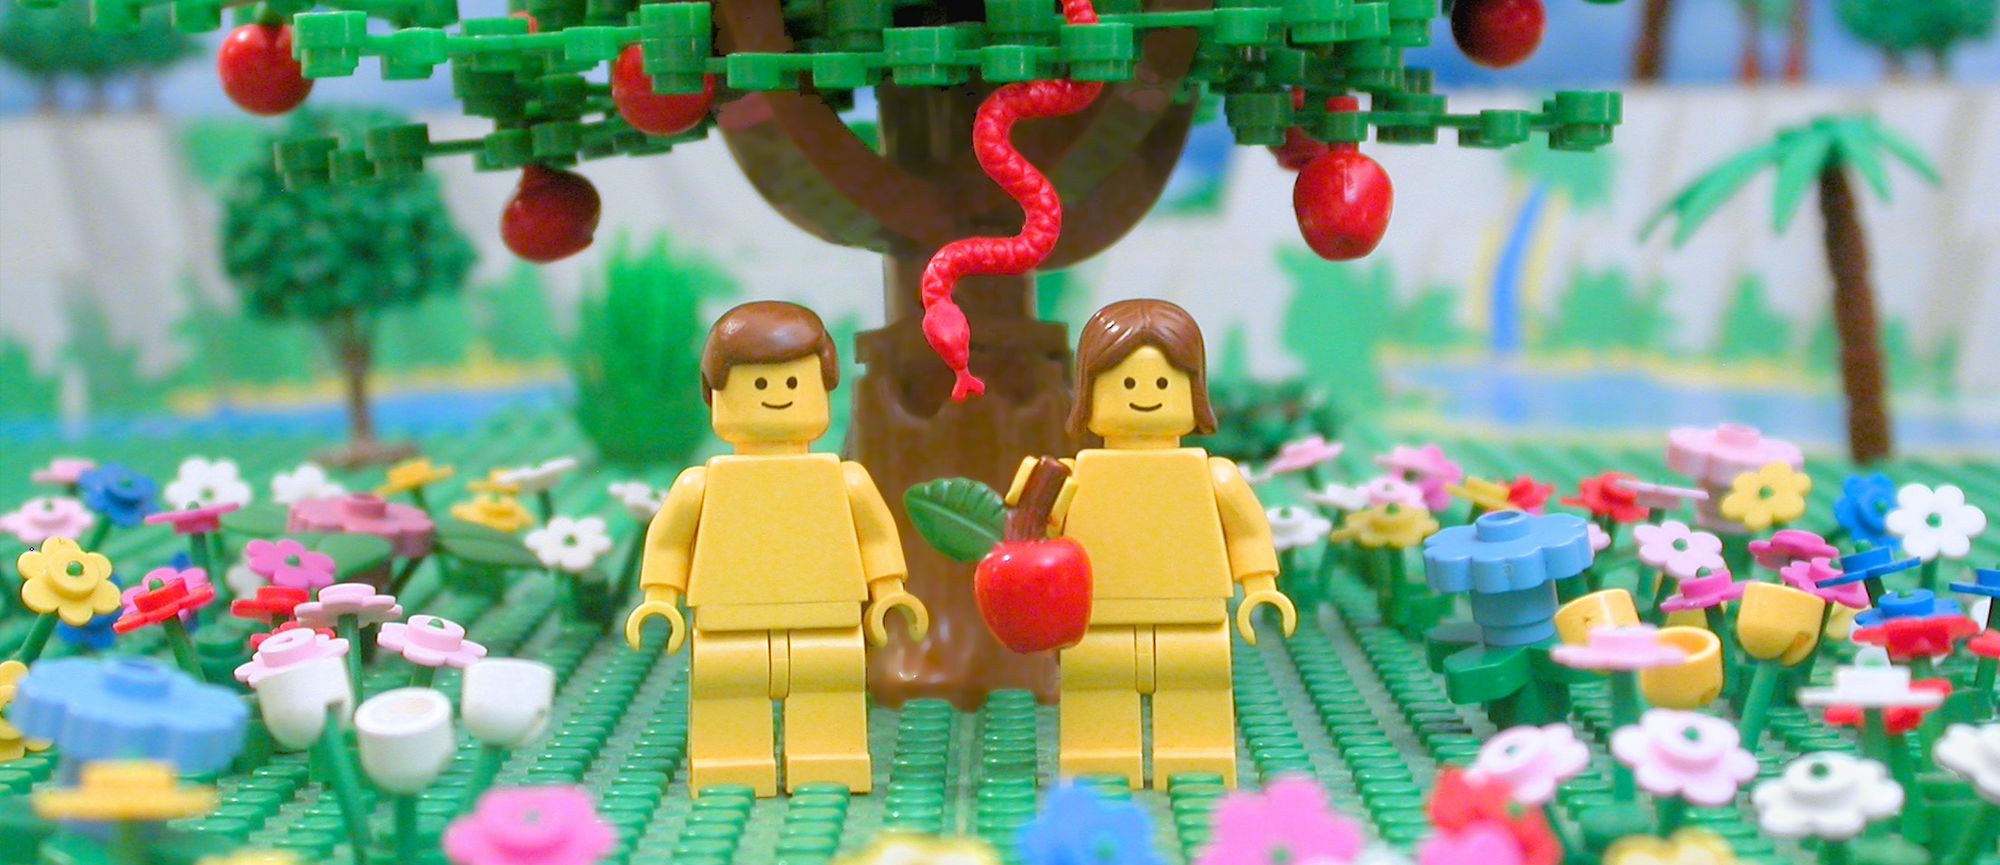 Adam and Eve in the Garden of Eden are depicted using LEGO bricks.